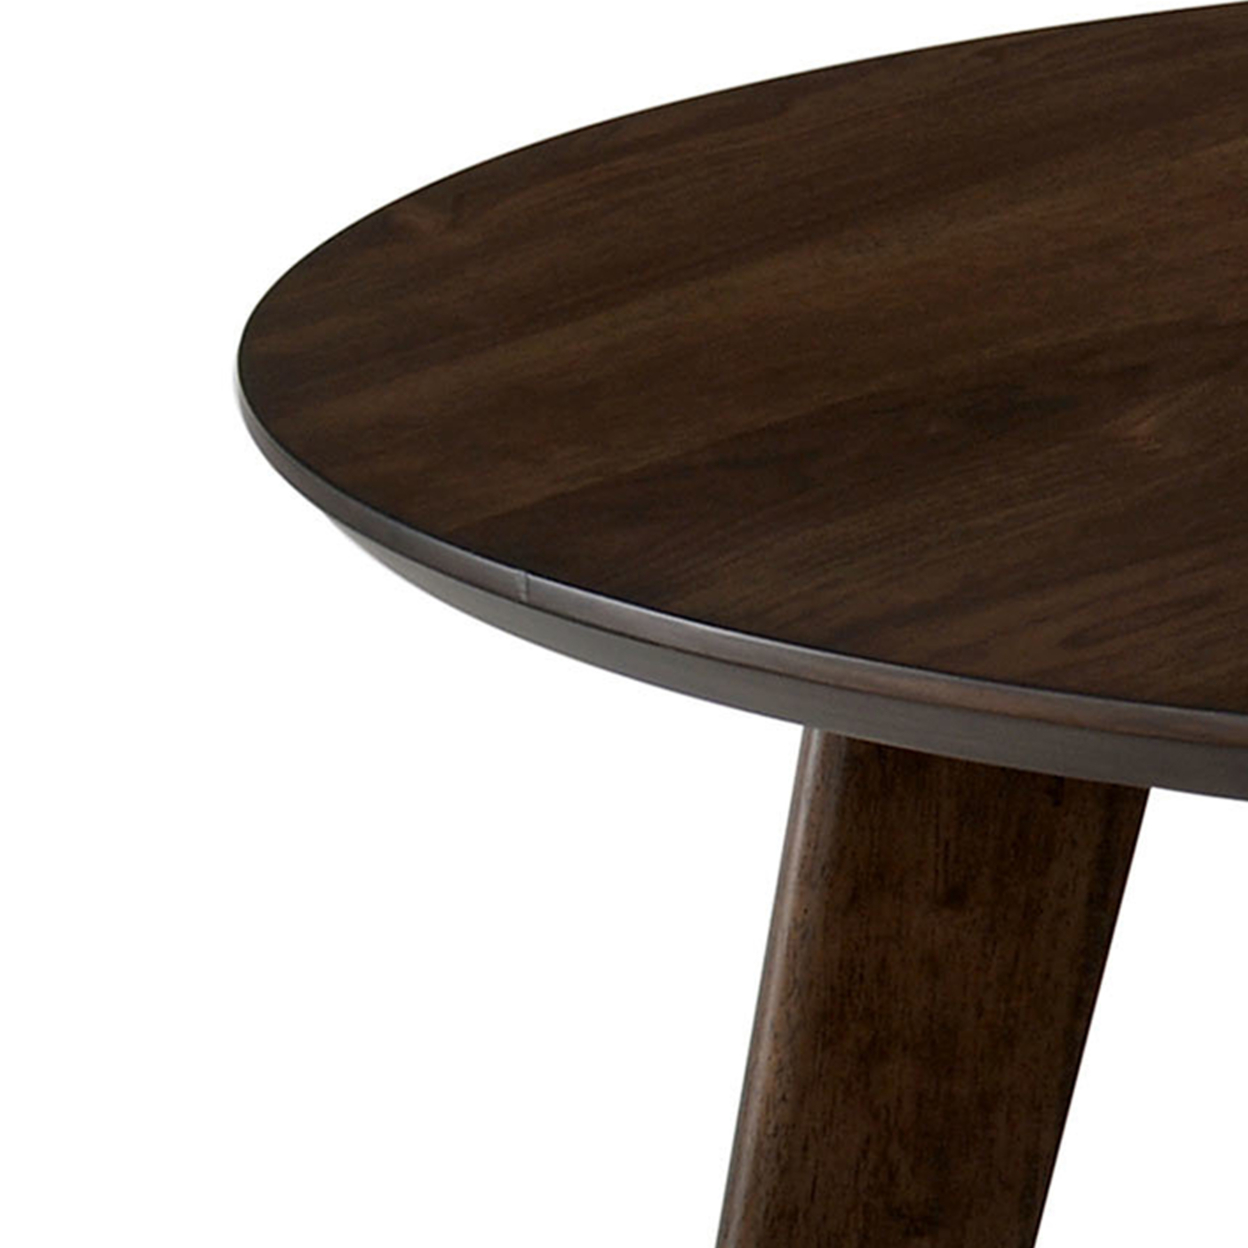 Round Wooden Dining Table With Fin Style Leg Support, Walnut Brown- Saltoro Sherpi